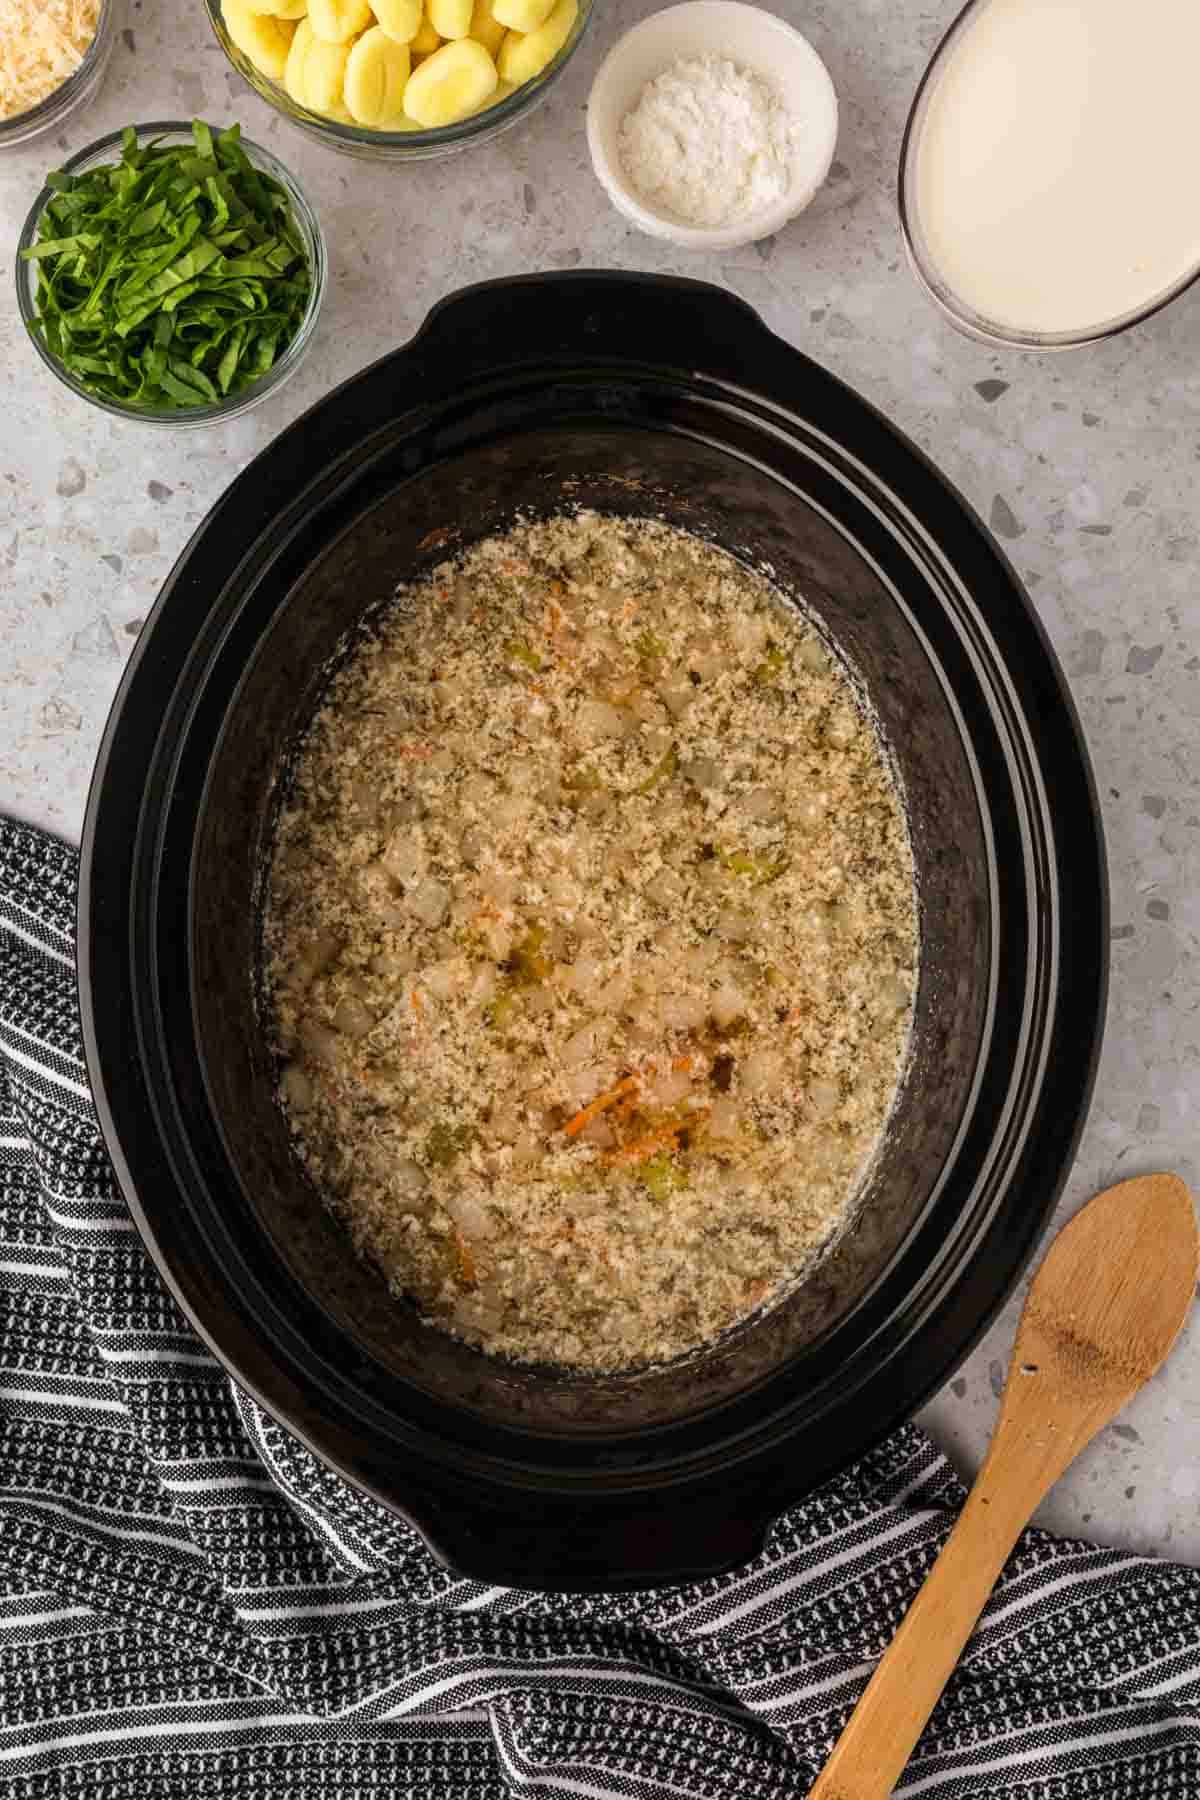 Cooked mixture in the slow cooker